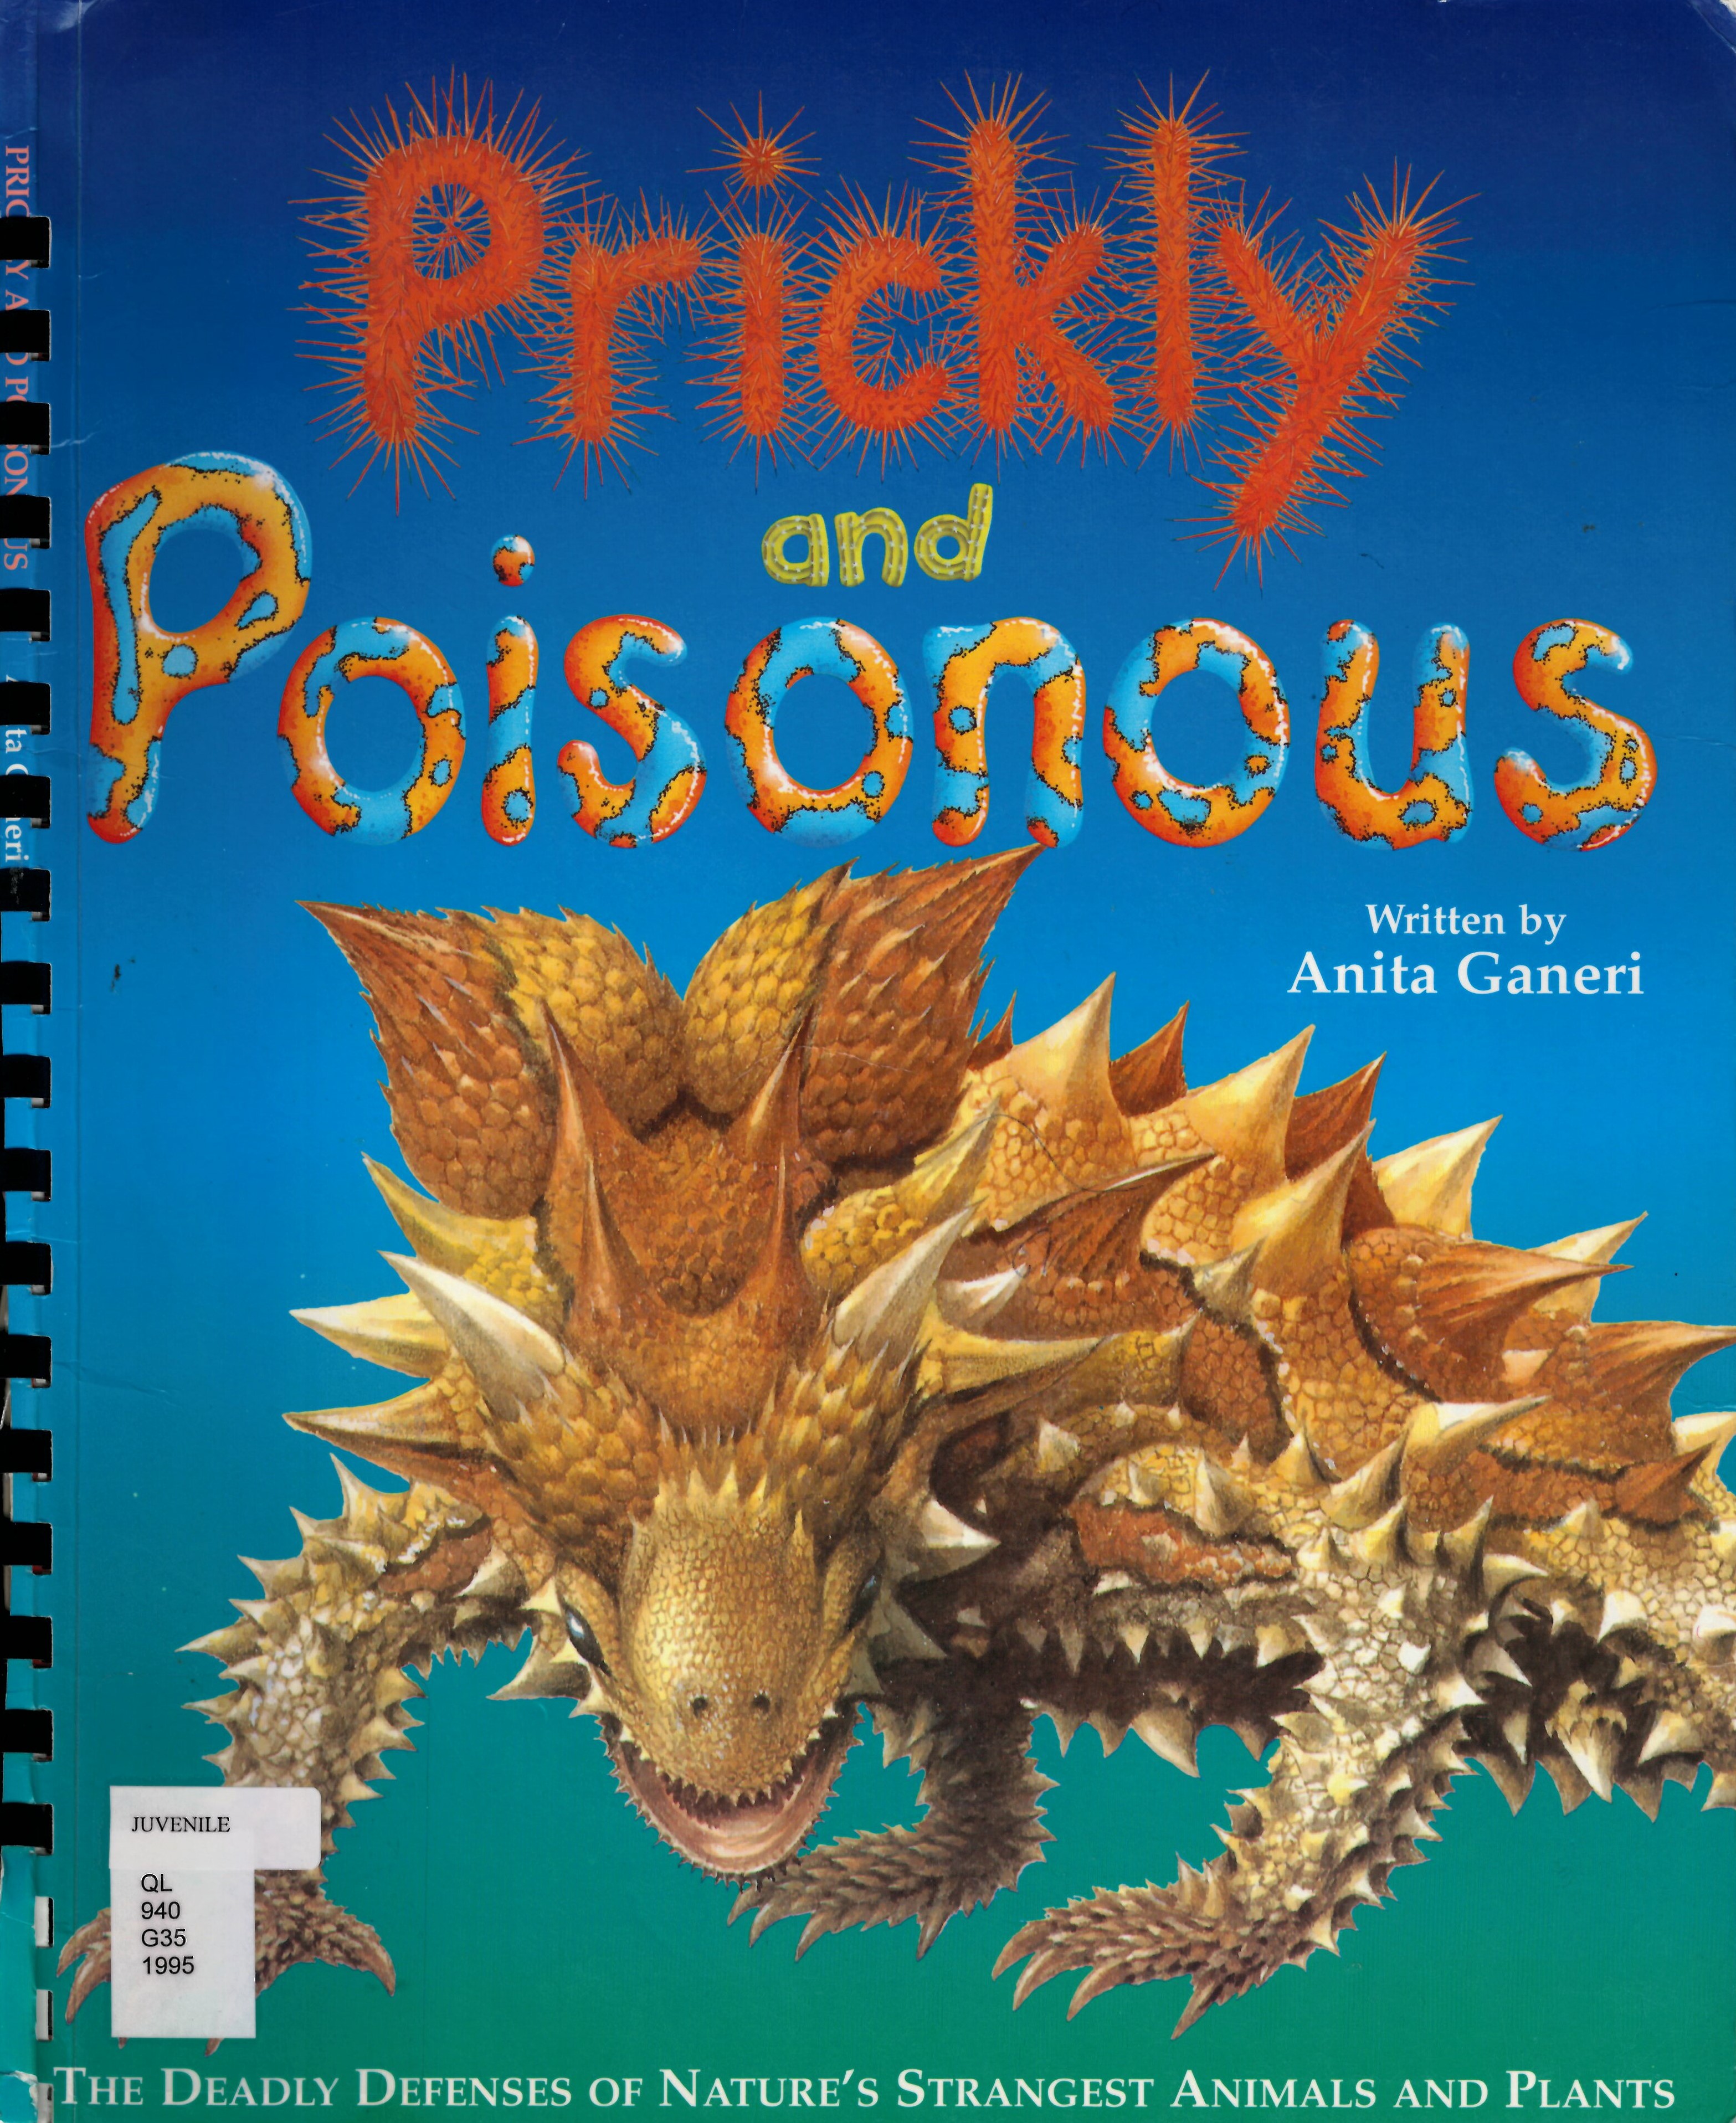 Prickly and poisonous : the deadly defenses of nature's strangest animals and plants